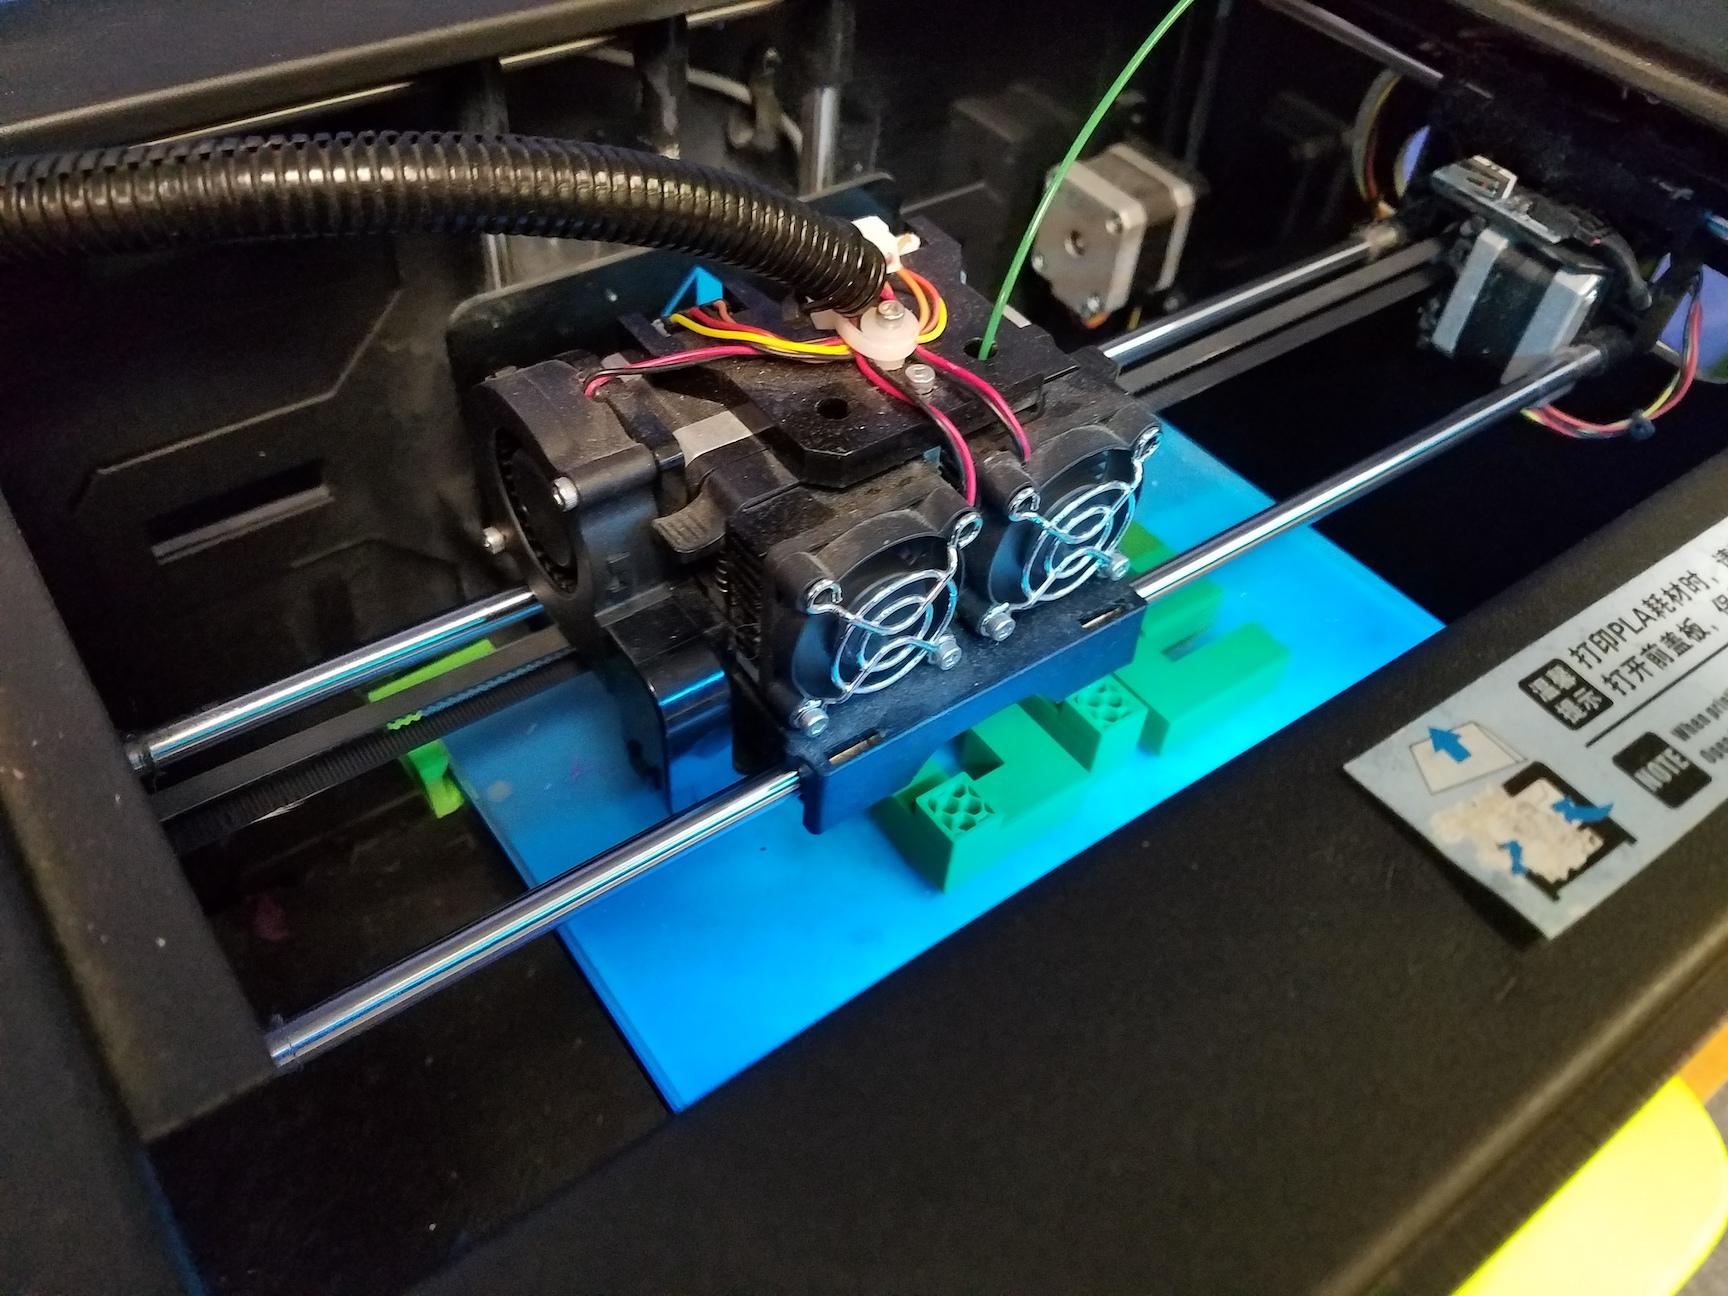 The 3D printer created each part of the puzzle